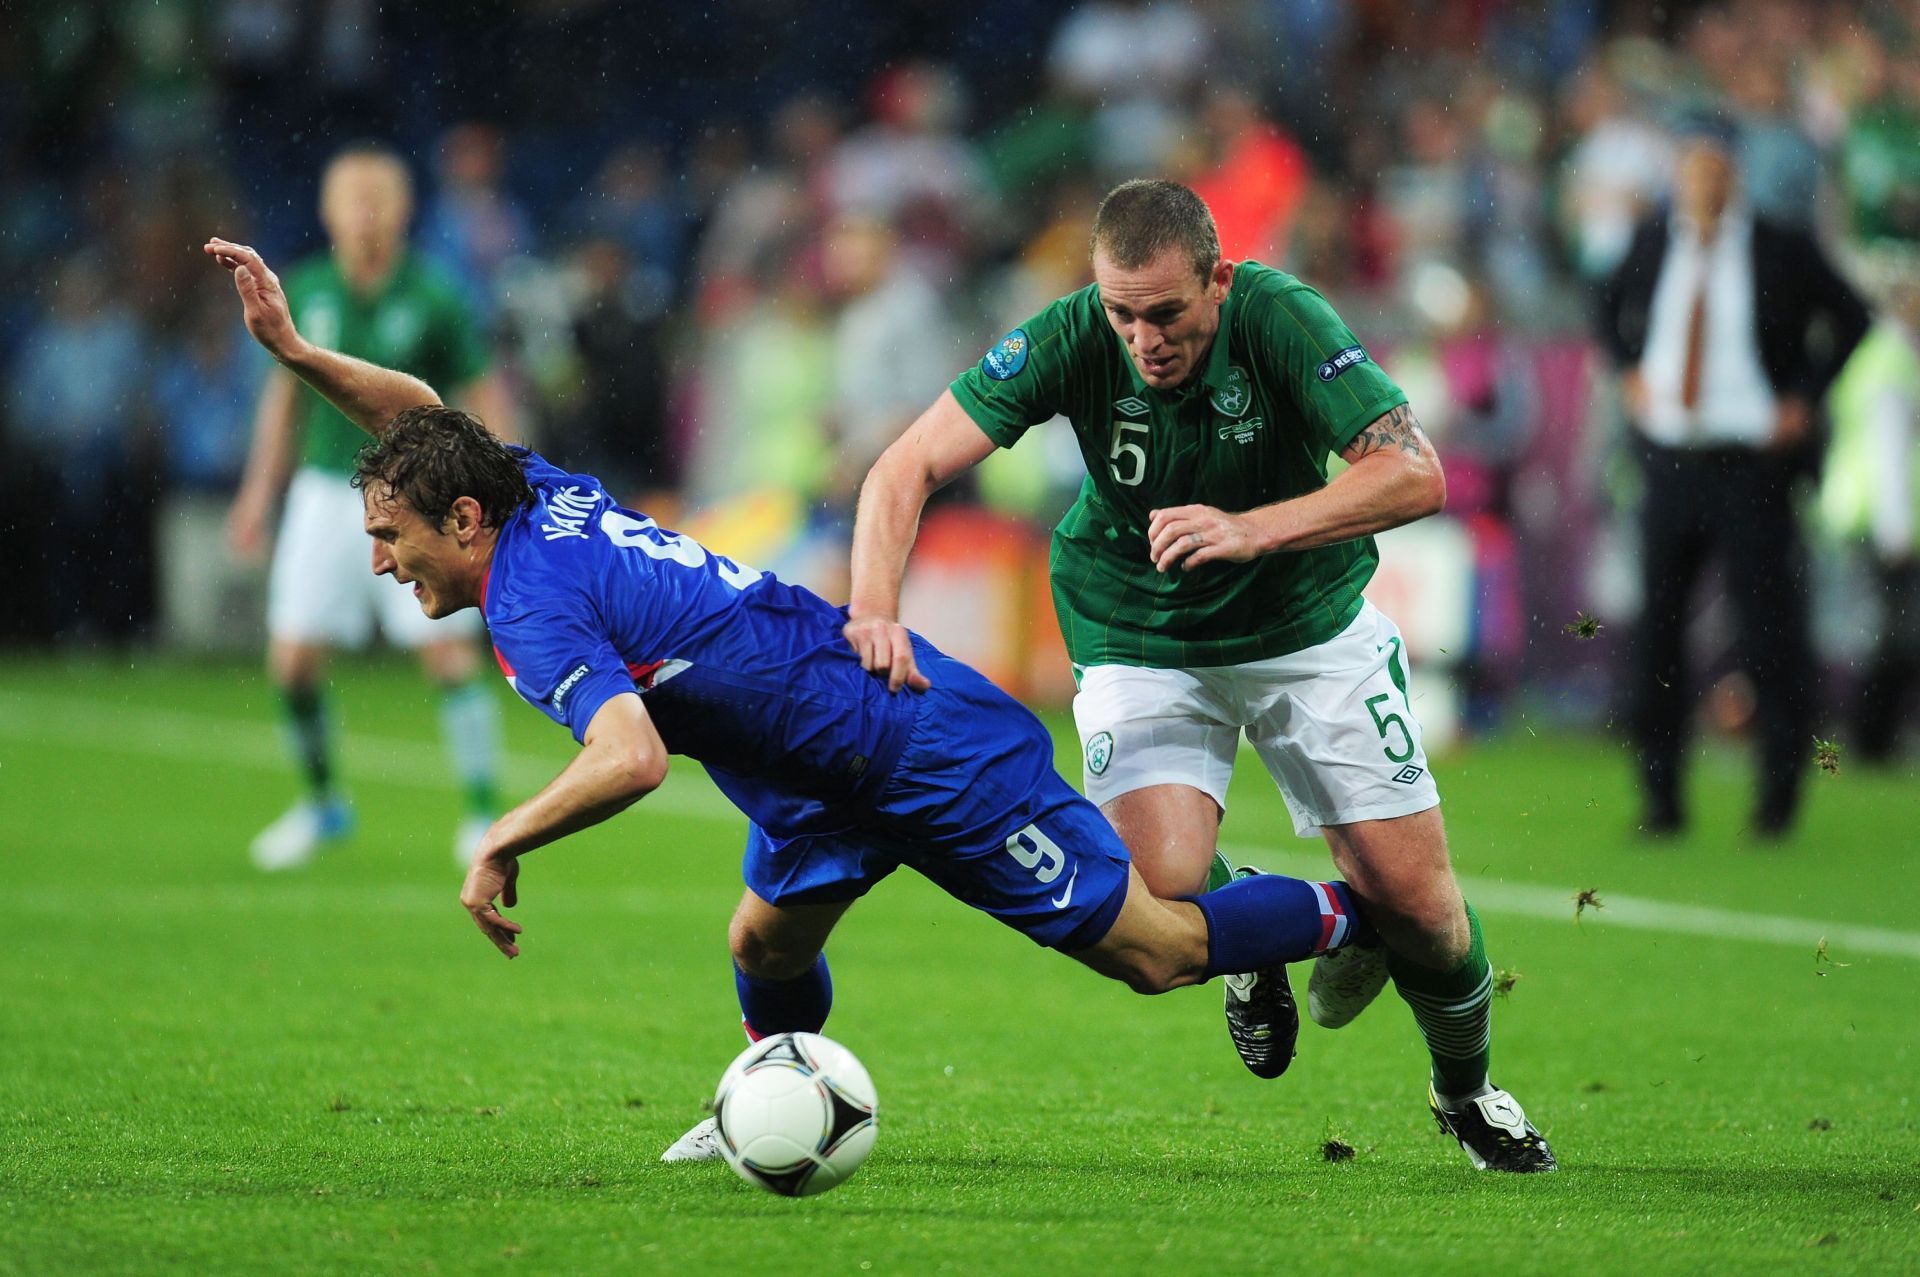 Dunne (right) clashing with a Croatian player at the UEFA EURO 2012